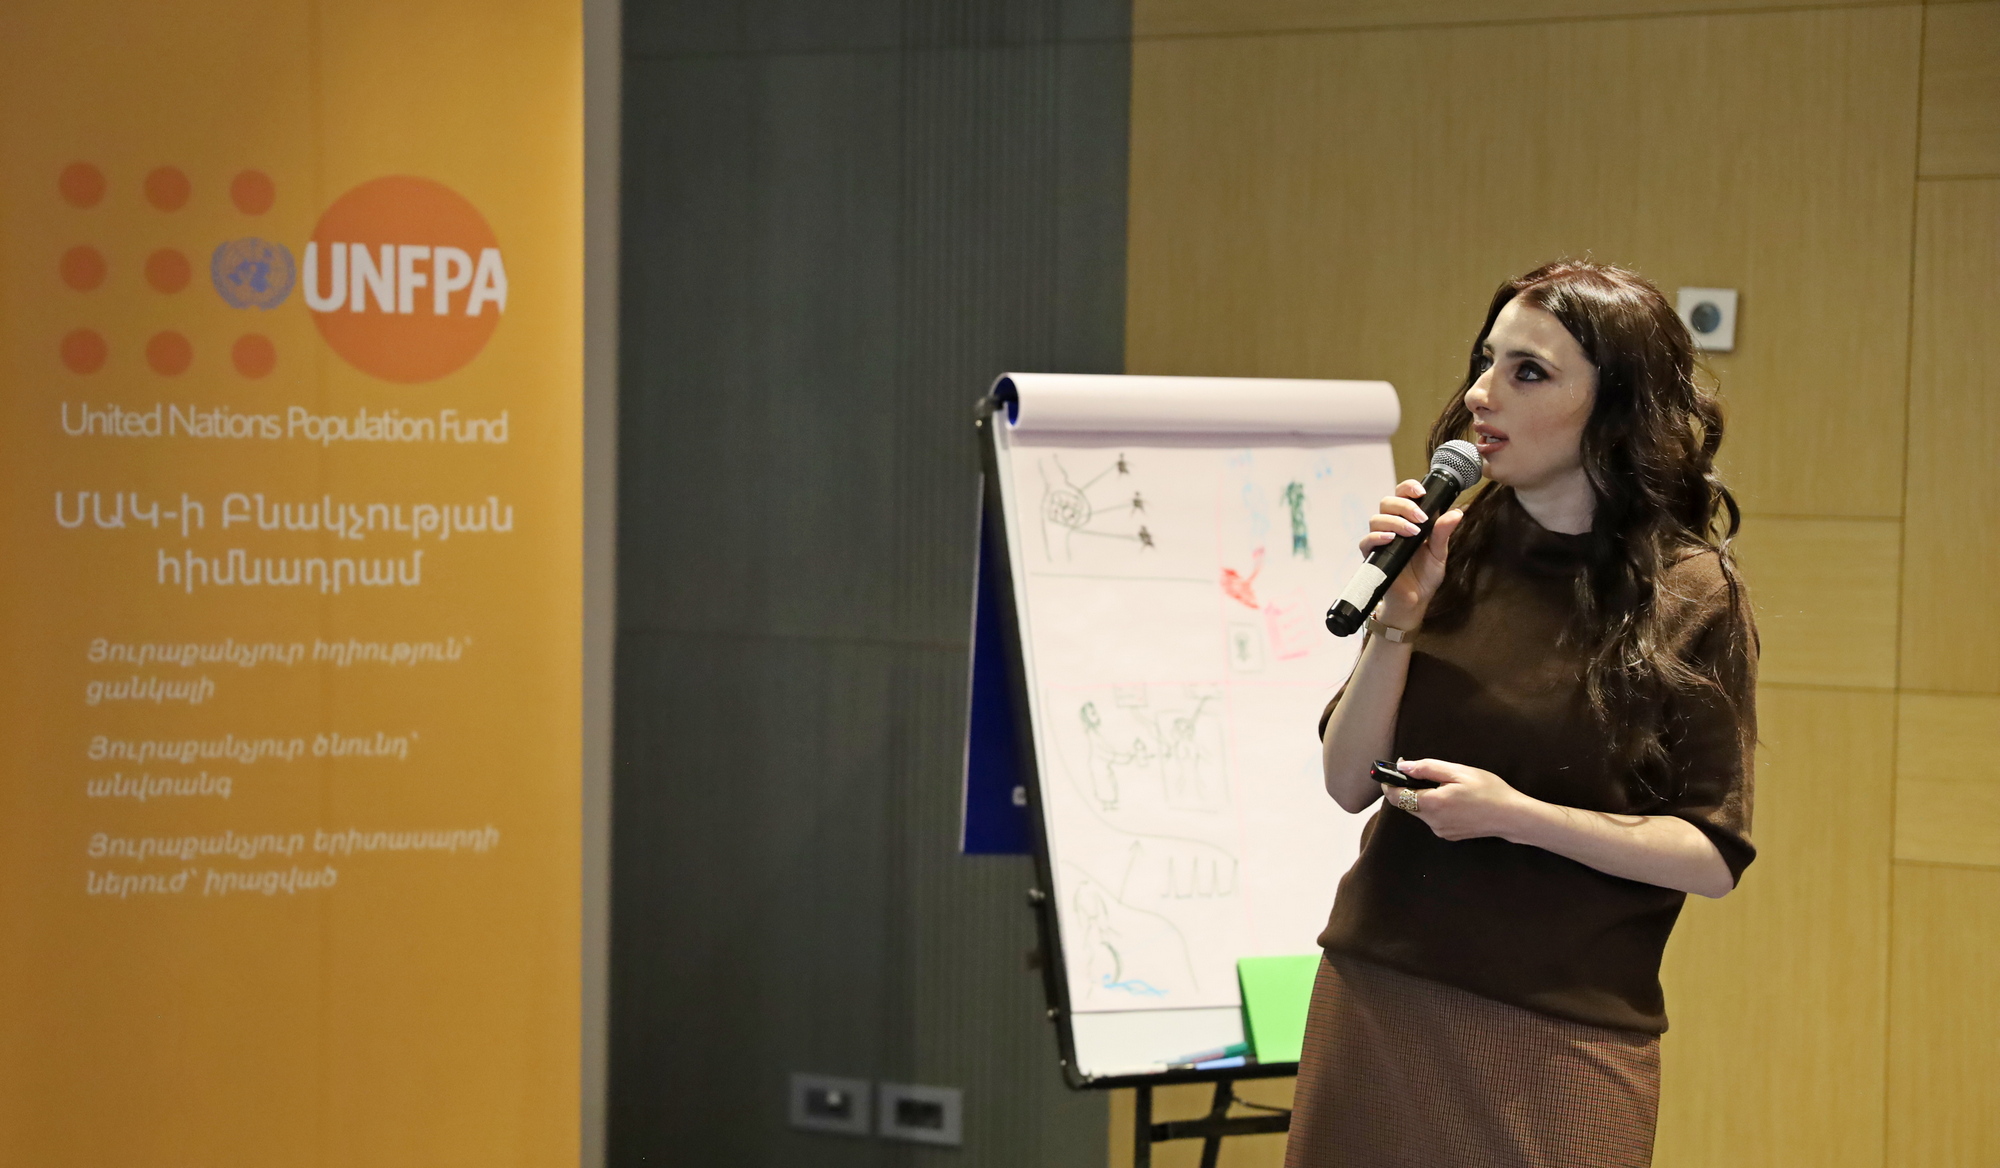 The image depicts a woman speaking into a microphone, in the background, the banner of the United Nations Population Fund (UNFPA).